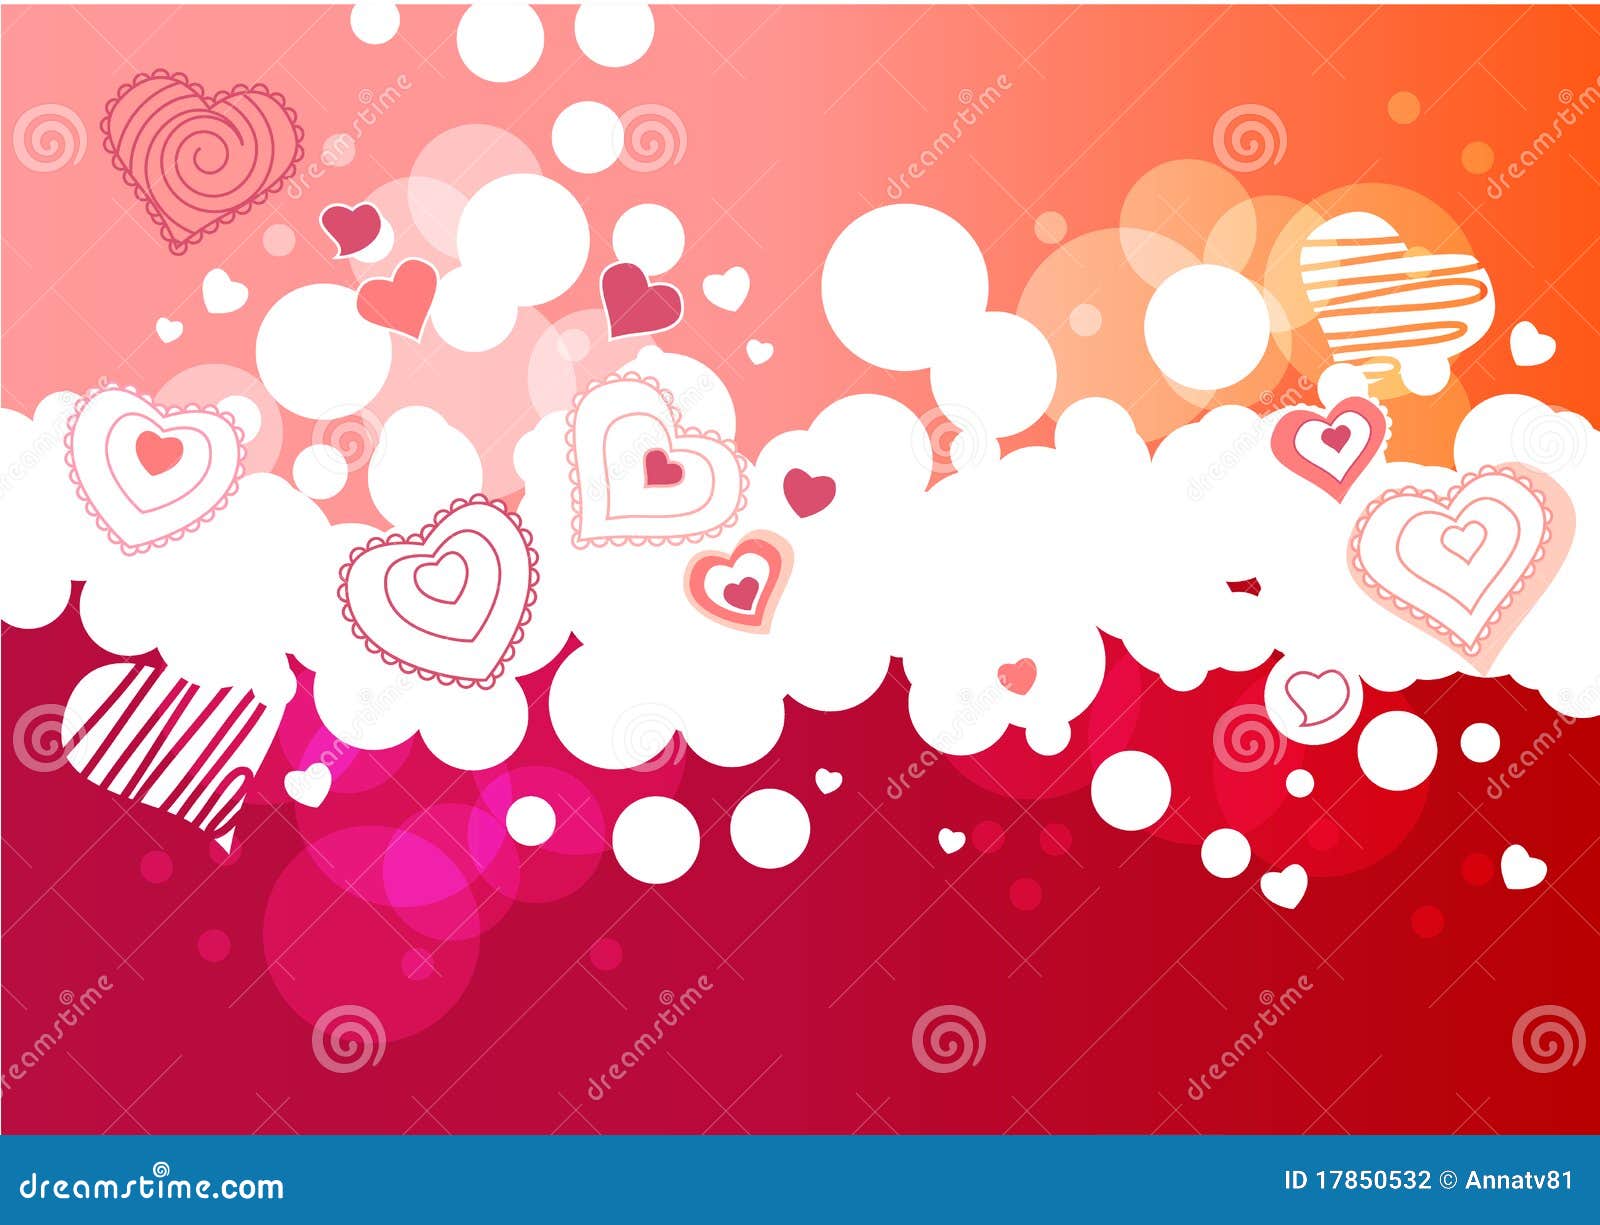 Pink bubble background stock vector. Illustration of passion - 17850532